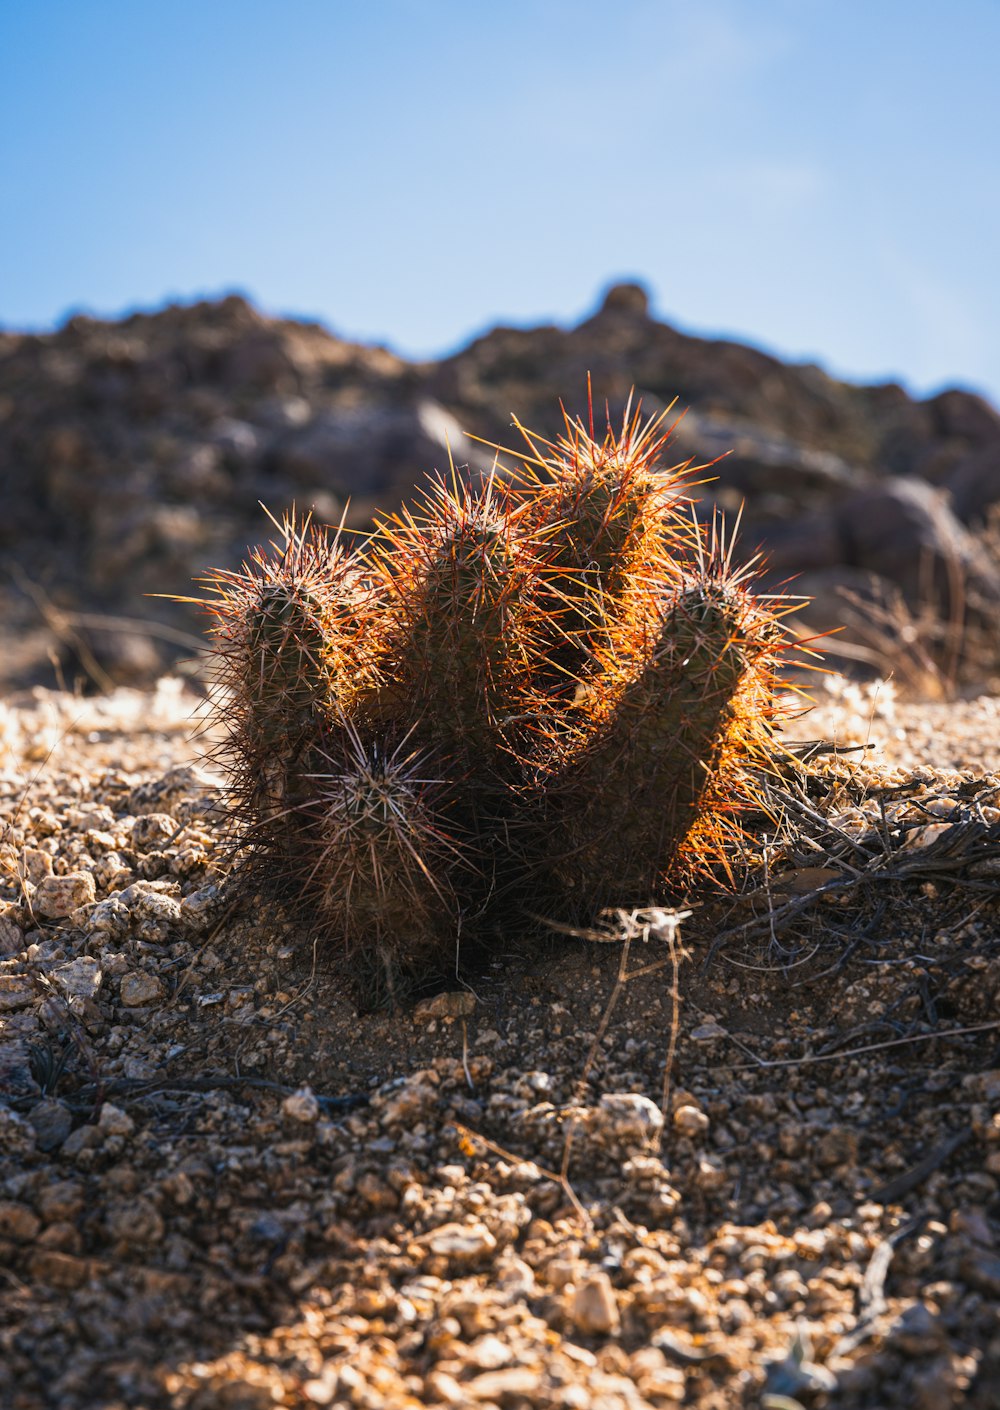 a small cactus in the middle of a desert